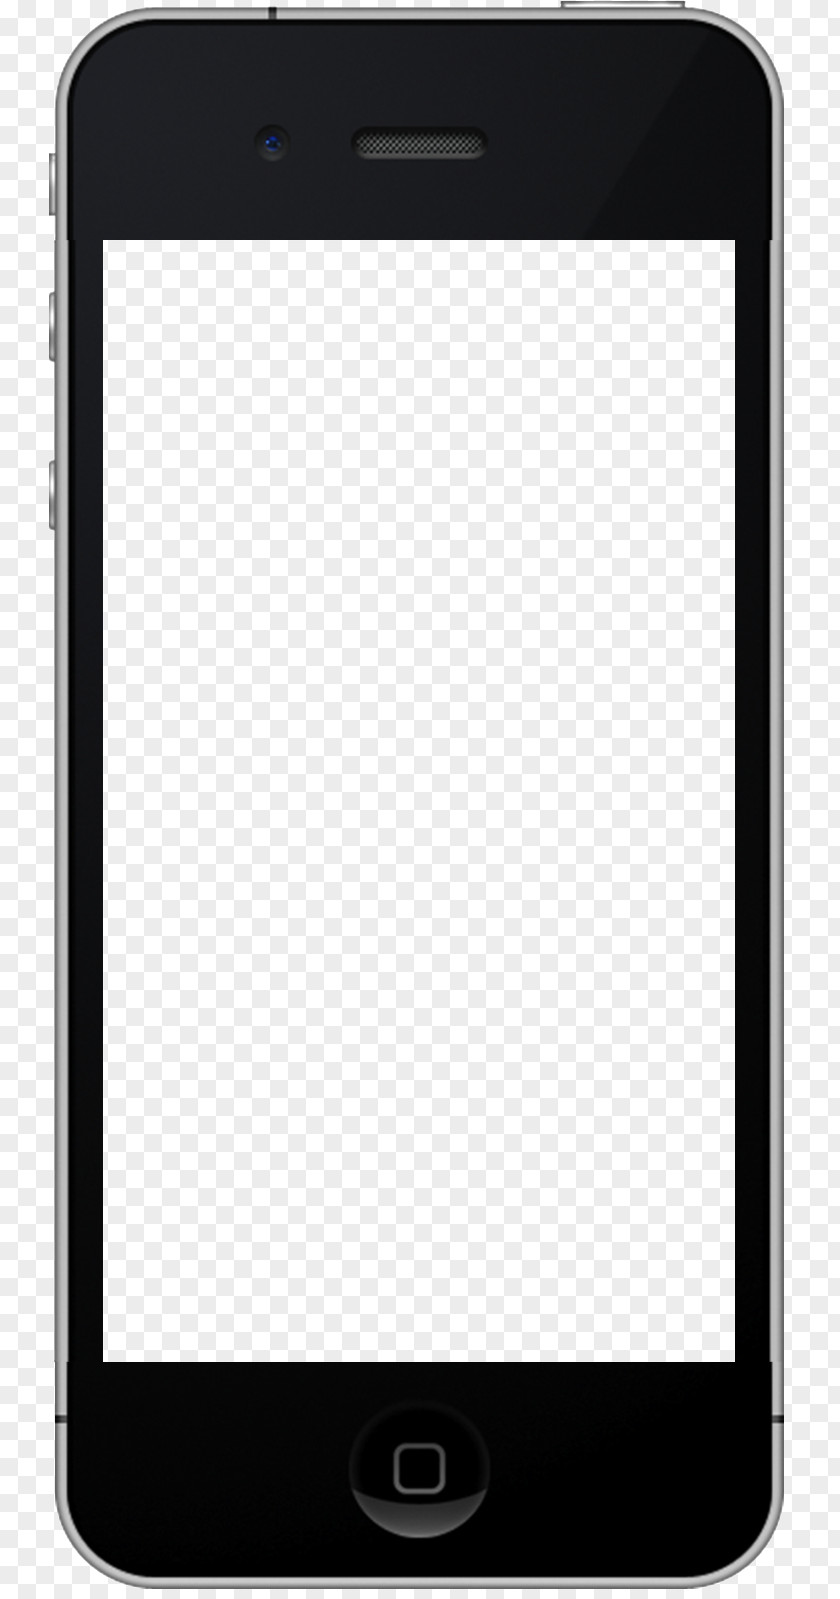 Border Design IPhone Smartphone Handheld Devices Telephone Clip Art PNG